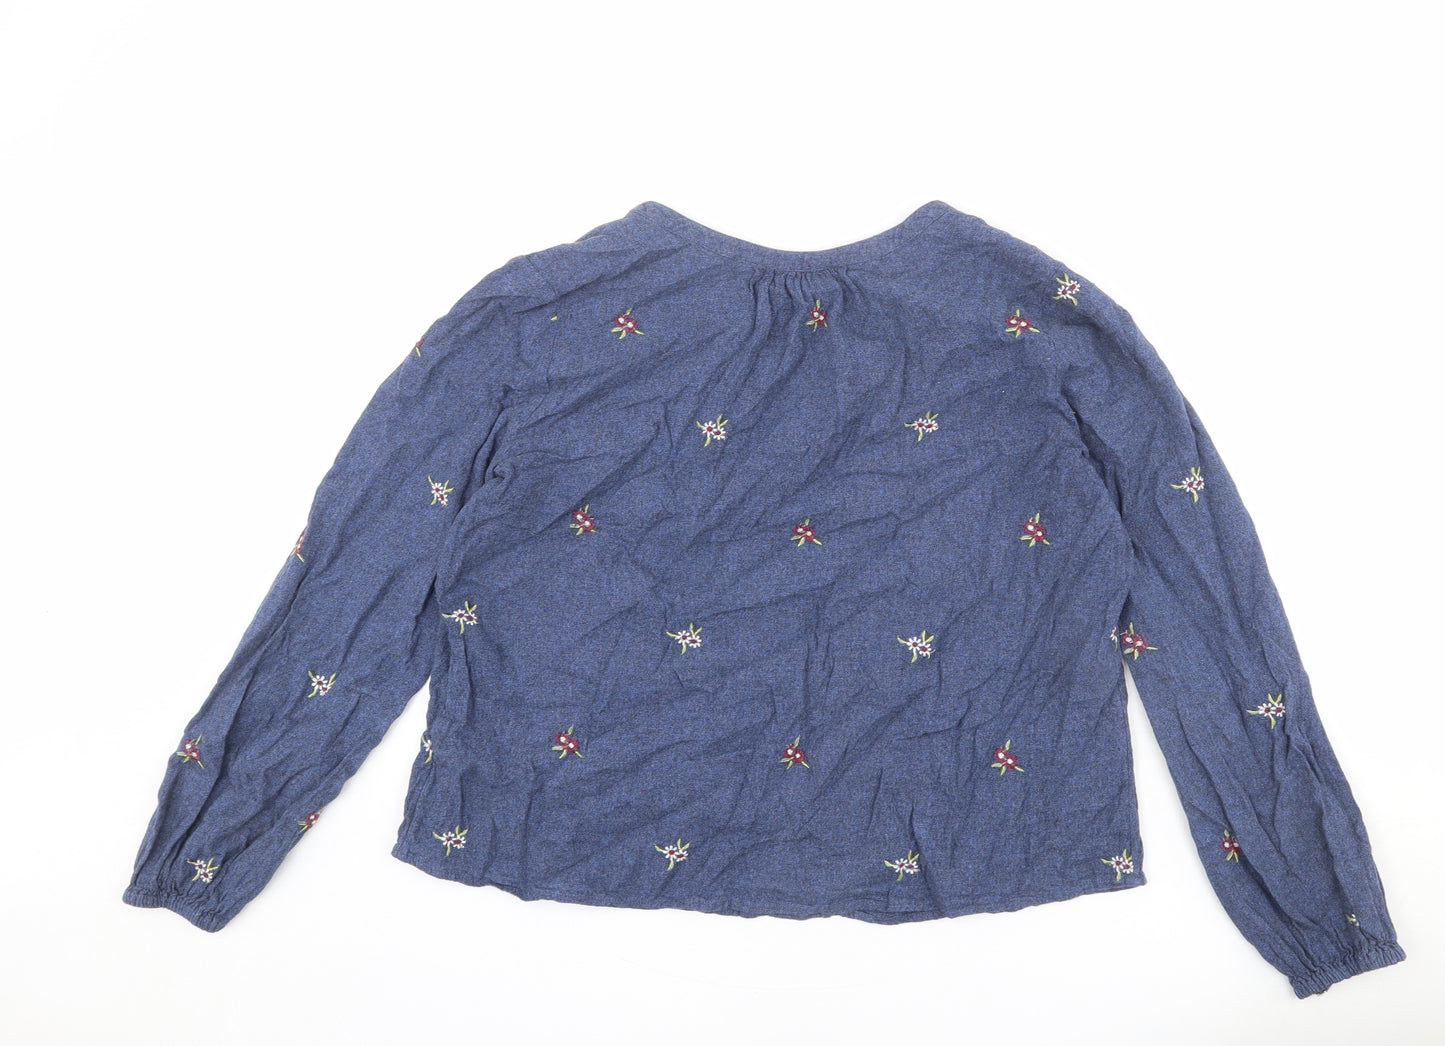 Marks and Spencer Womens Blue Floral Cotton Basic Blouse Size 10 V-Neck - Embroidered Detail